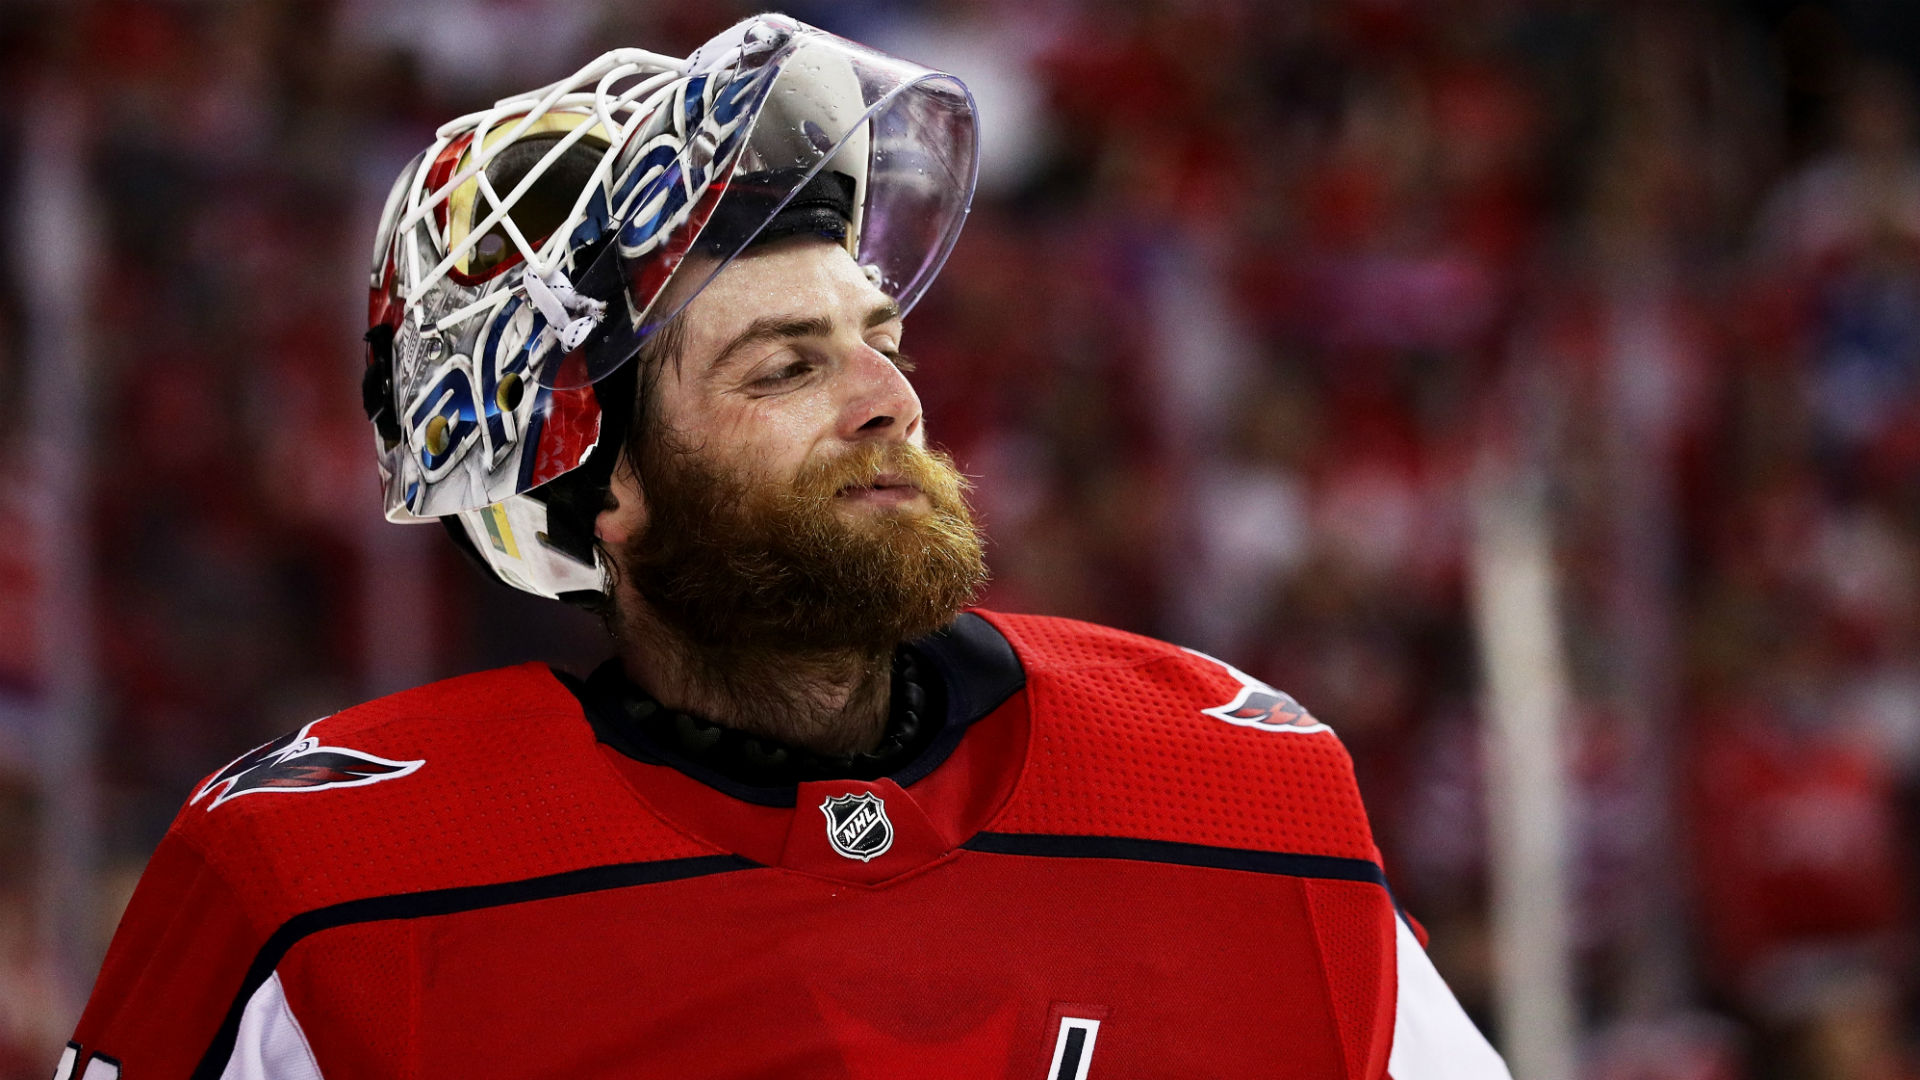 NHL playoffs 2018: Capitals' Braden Holtby makes 24 saves, records first shutout of ...